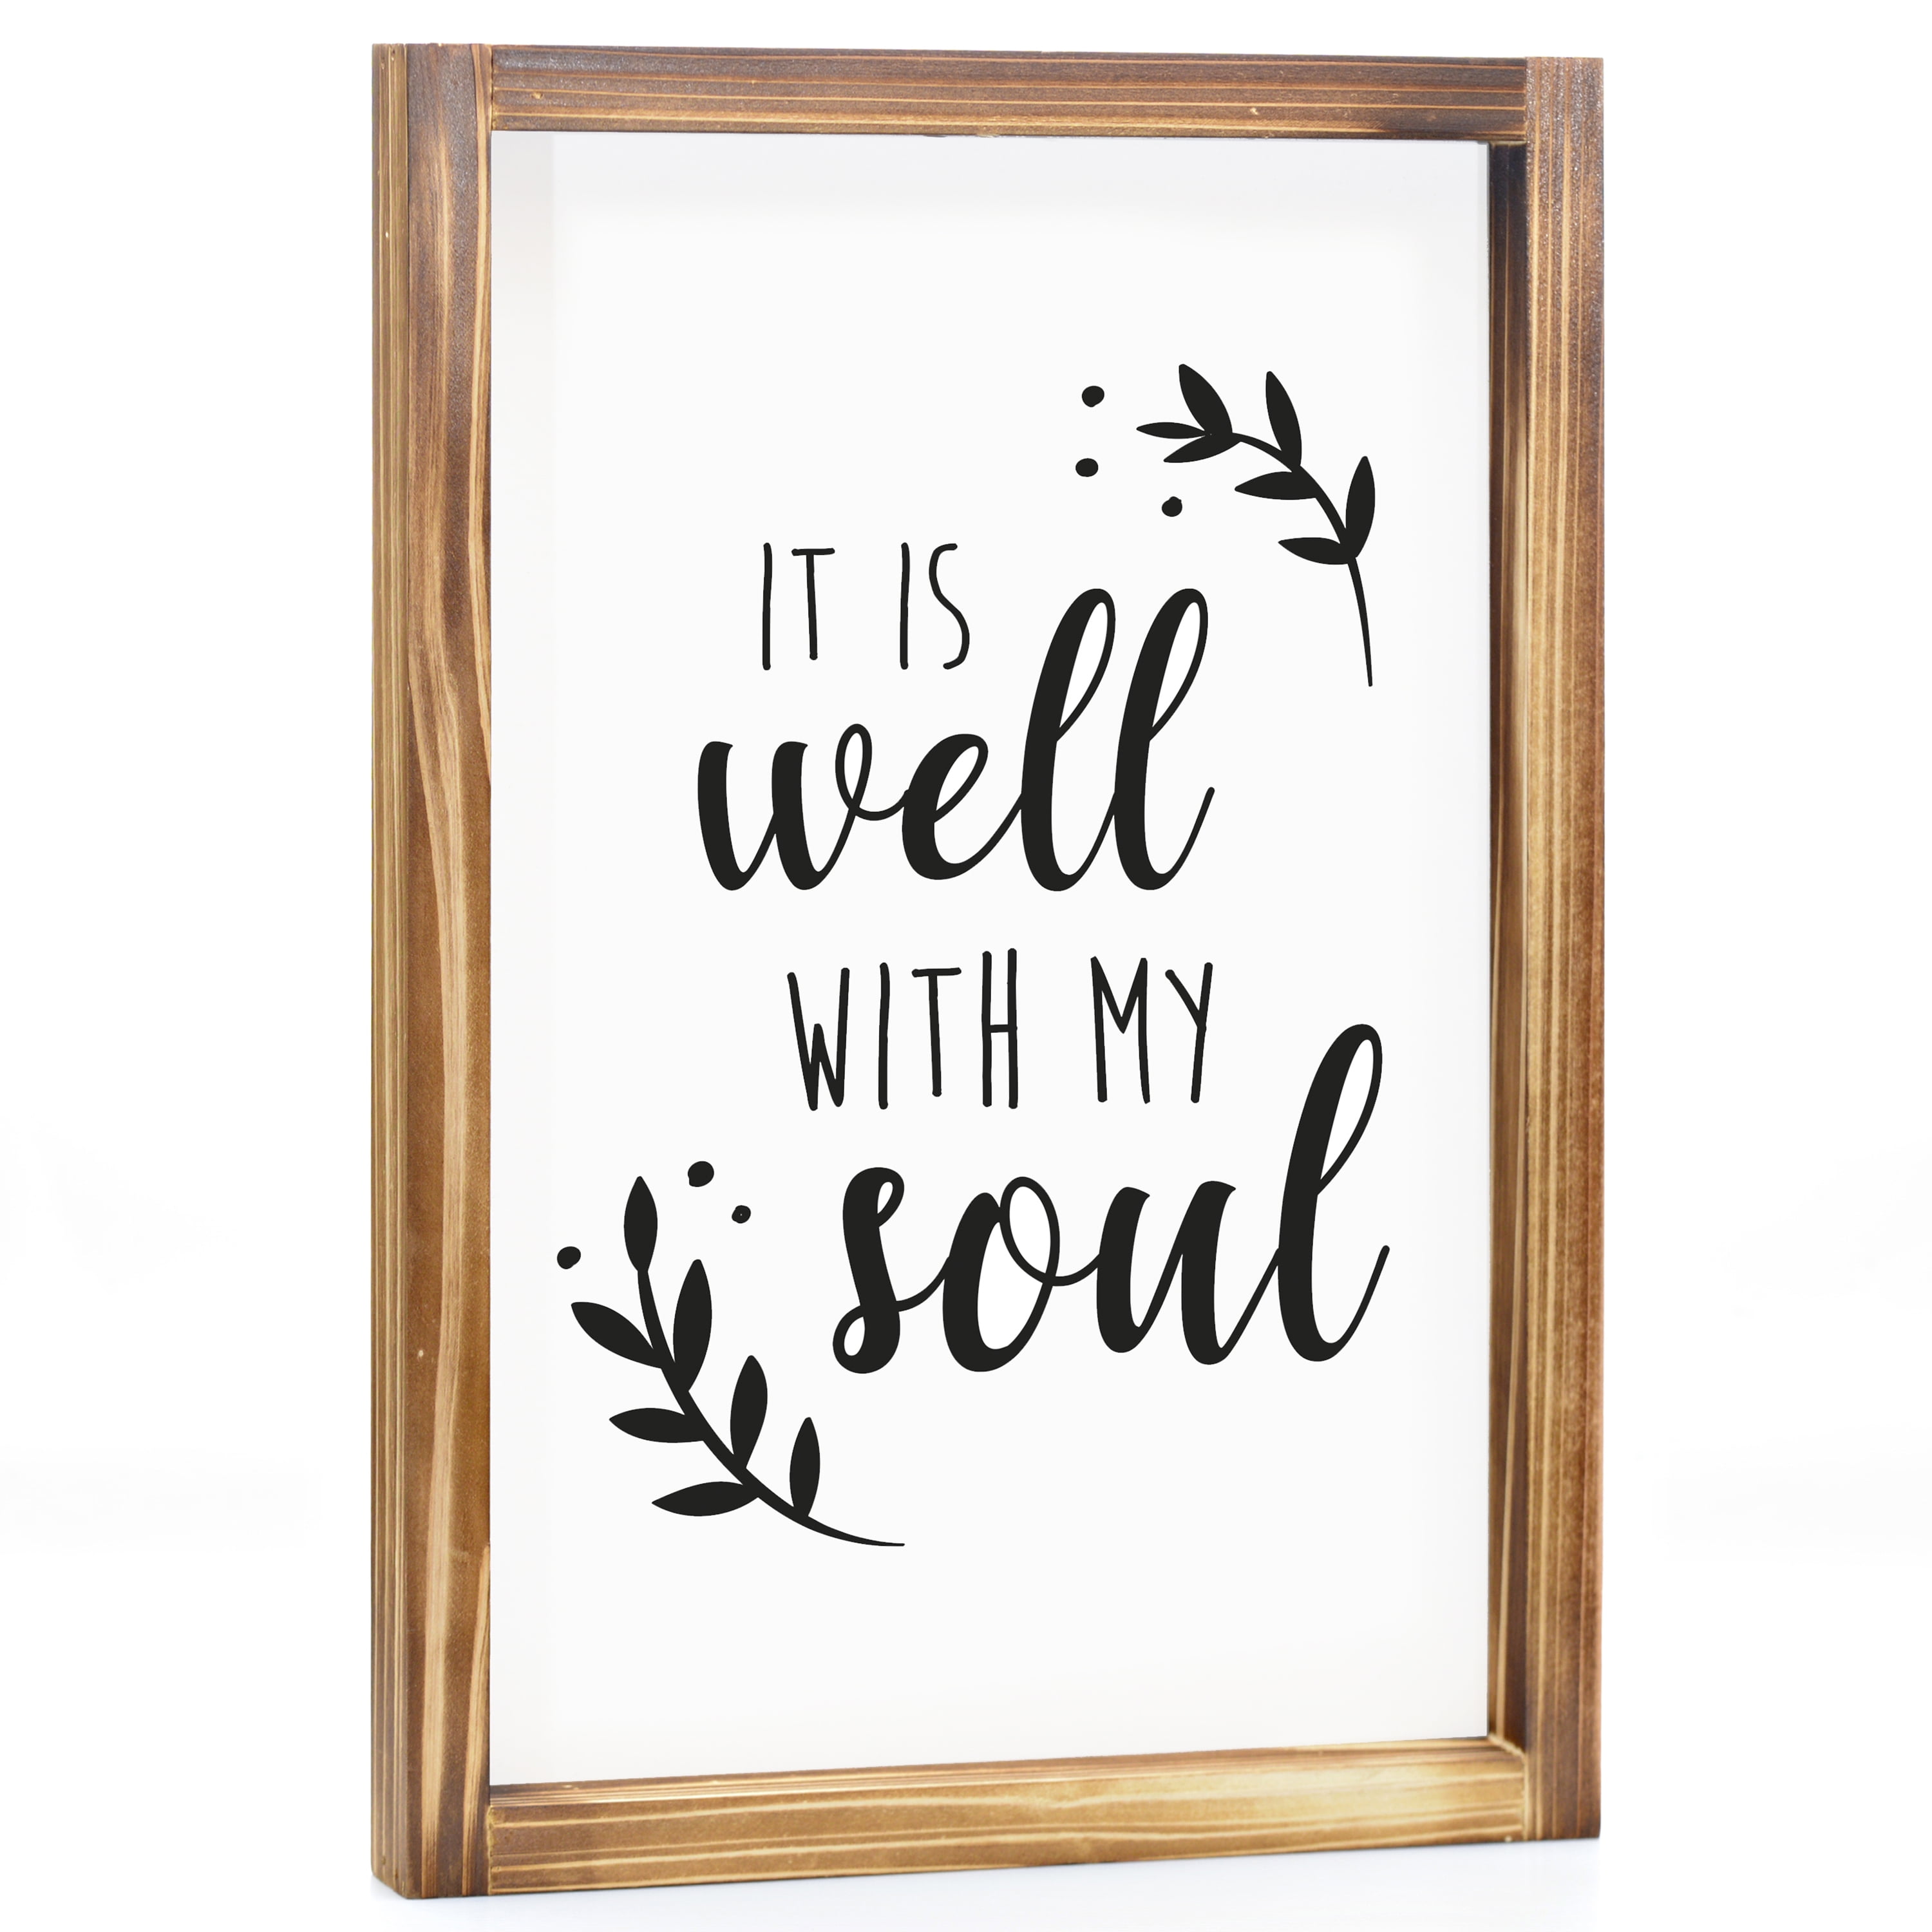 Quote You Died Souls Video Game Over Hard Wall Art Print Framed 12x16 